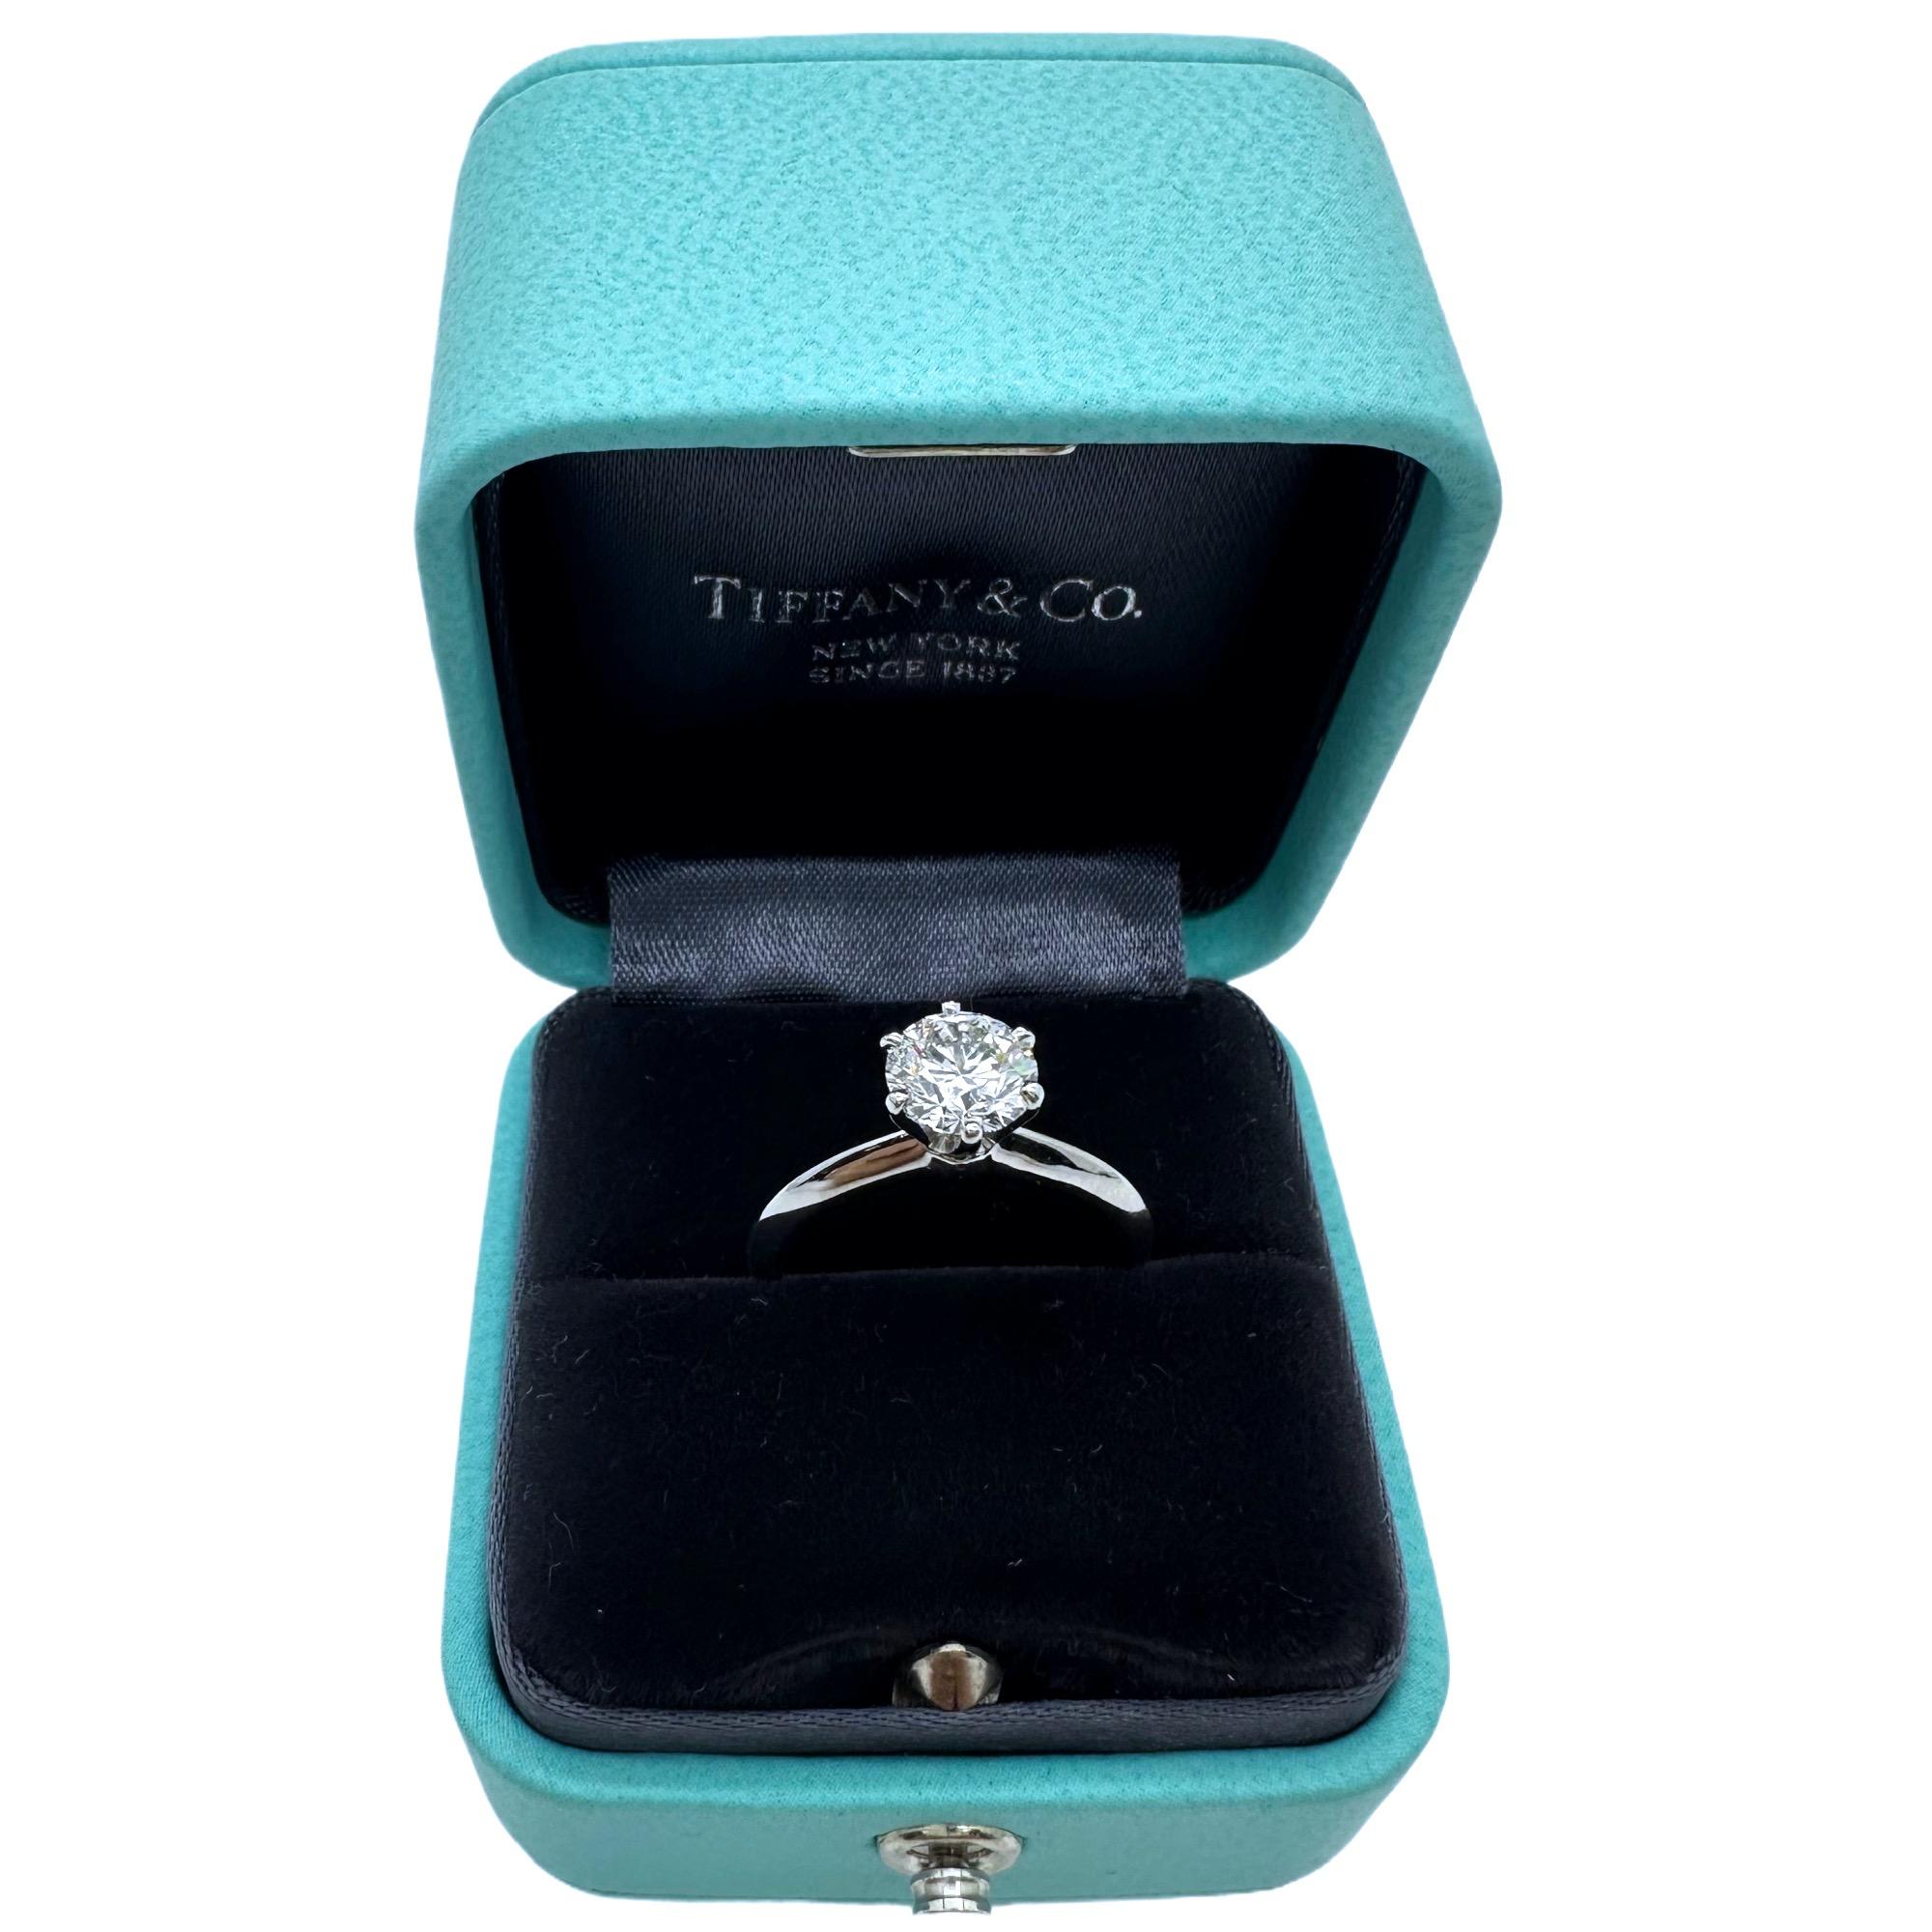 Tiffany & Co. Round Diamond 1.12 CTS G VS1 Solitaire Engagement Ring COA Box In Excellent Condition For Sale In San Diego, CA